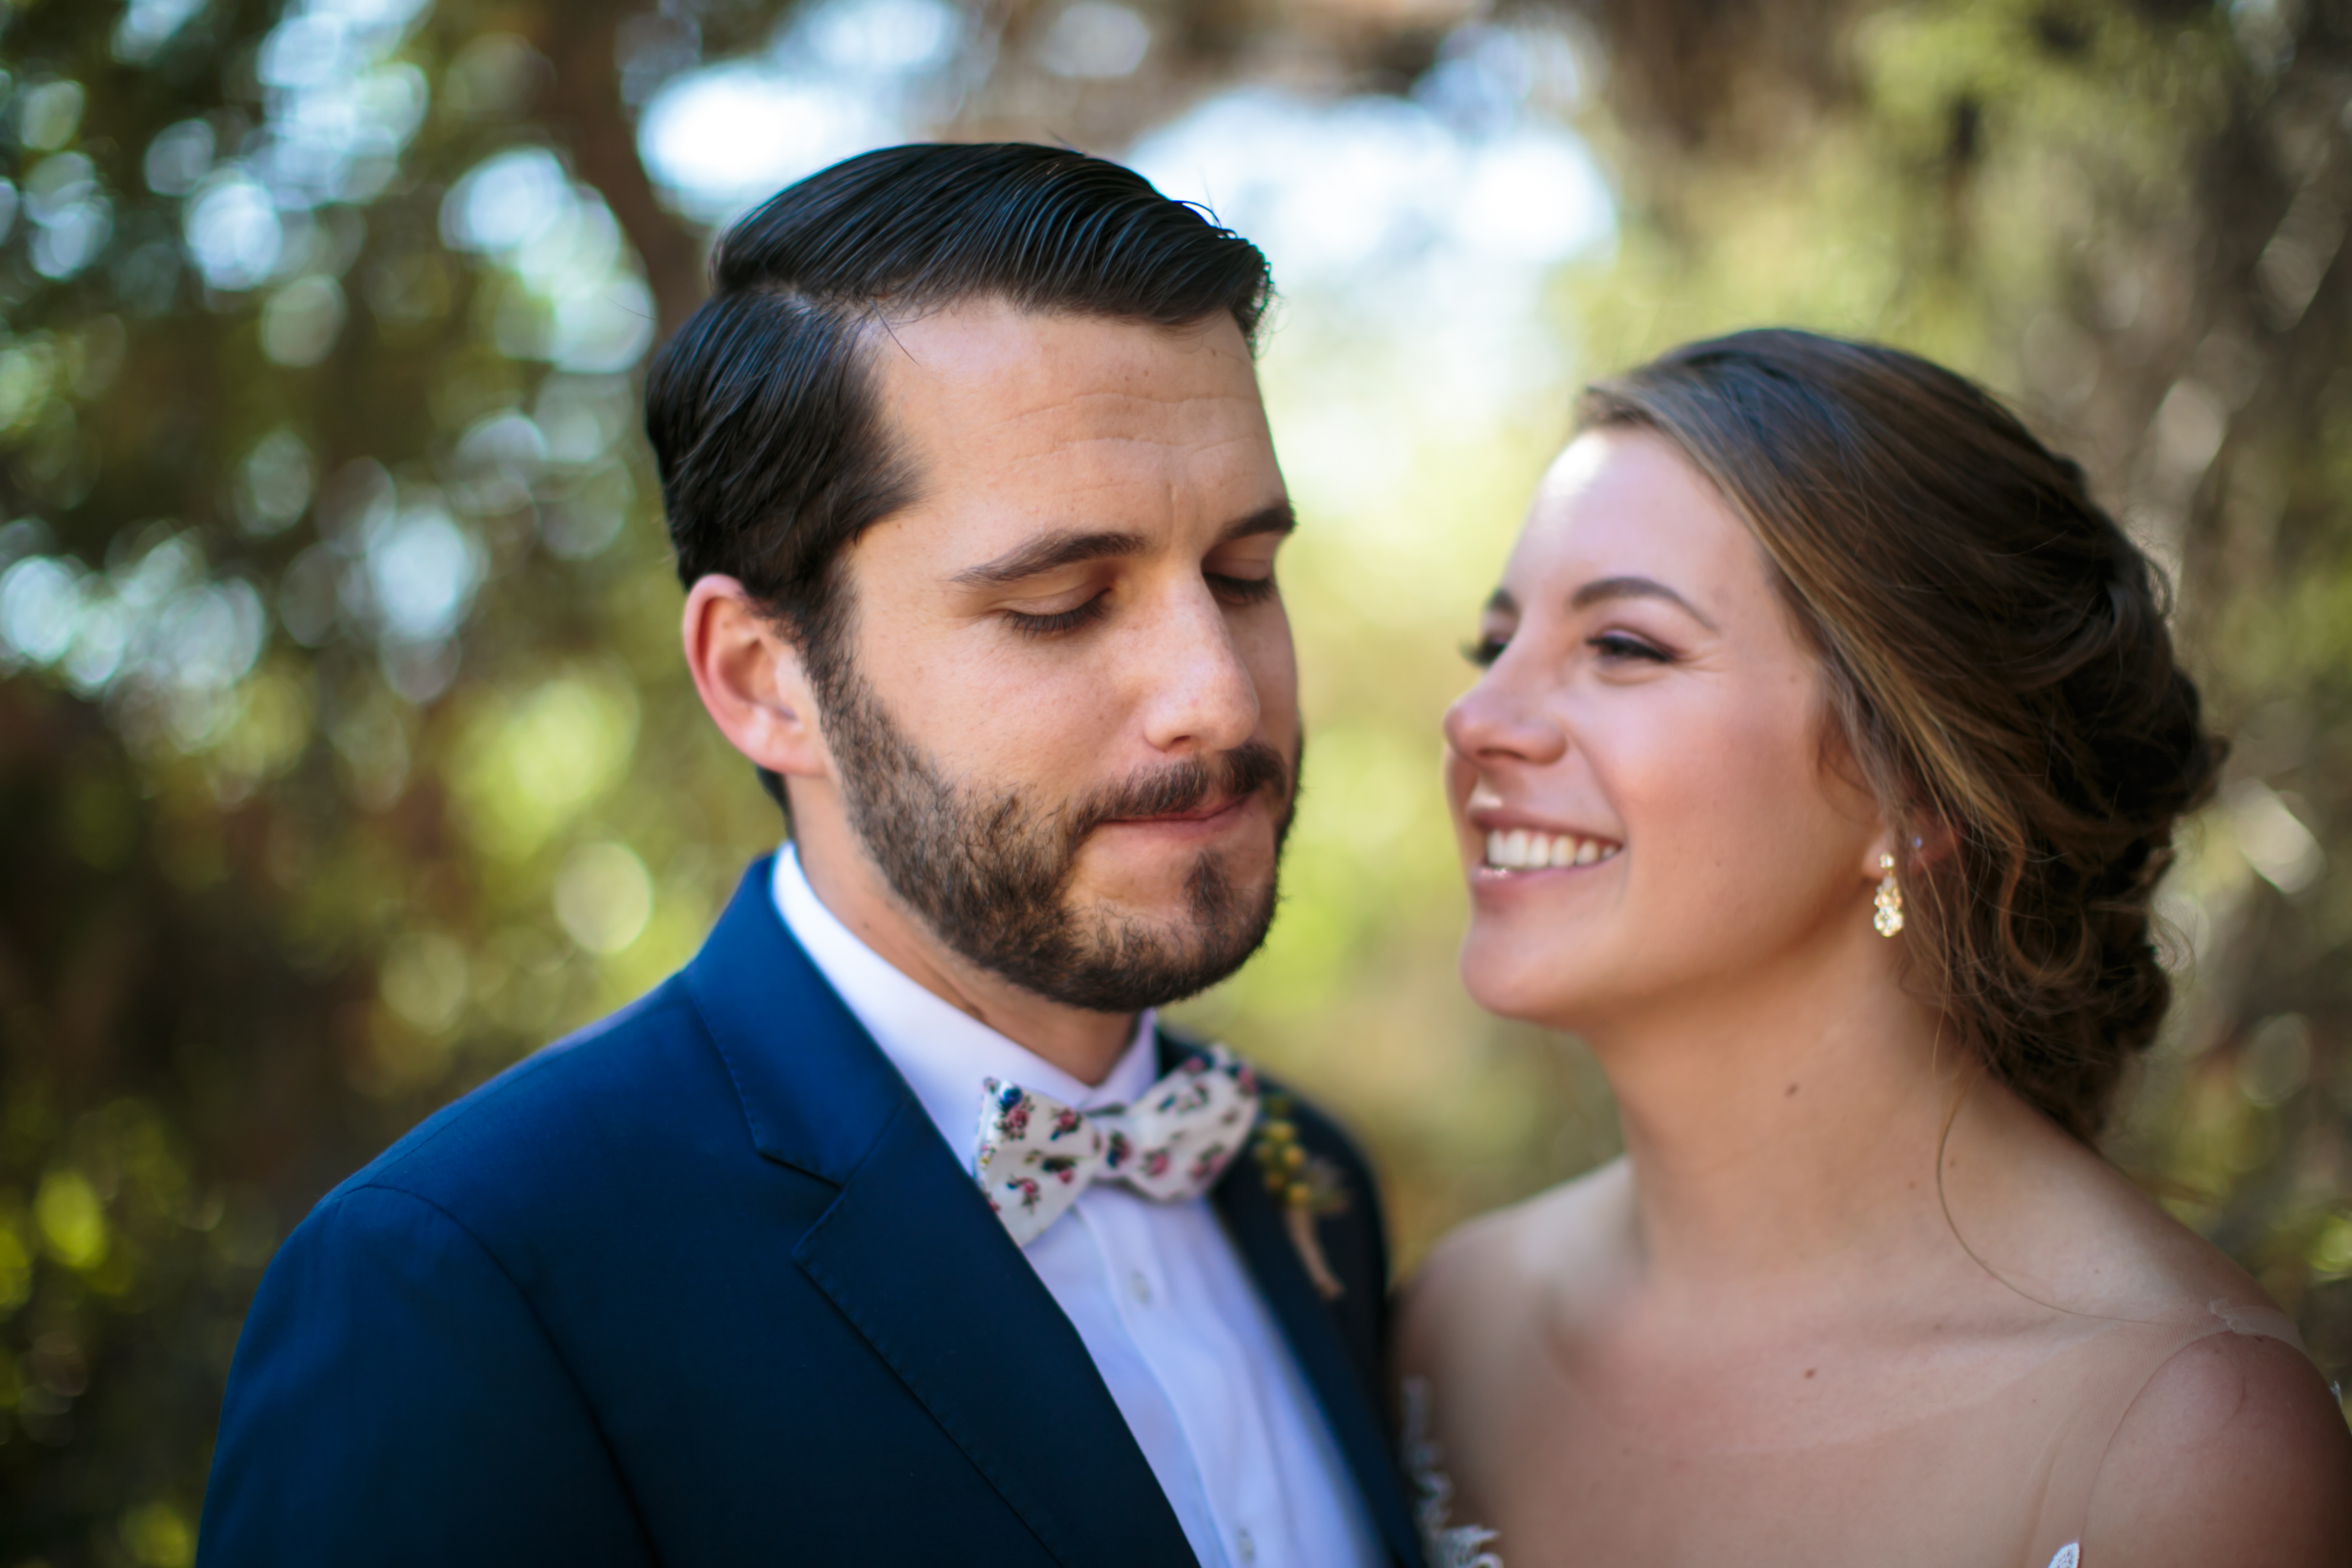 The groom wears a pink and blue floral tie with a blue suit jacket. They are standing in front of some backlit trees and she is smiling at him.